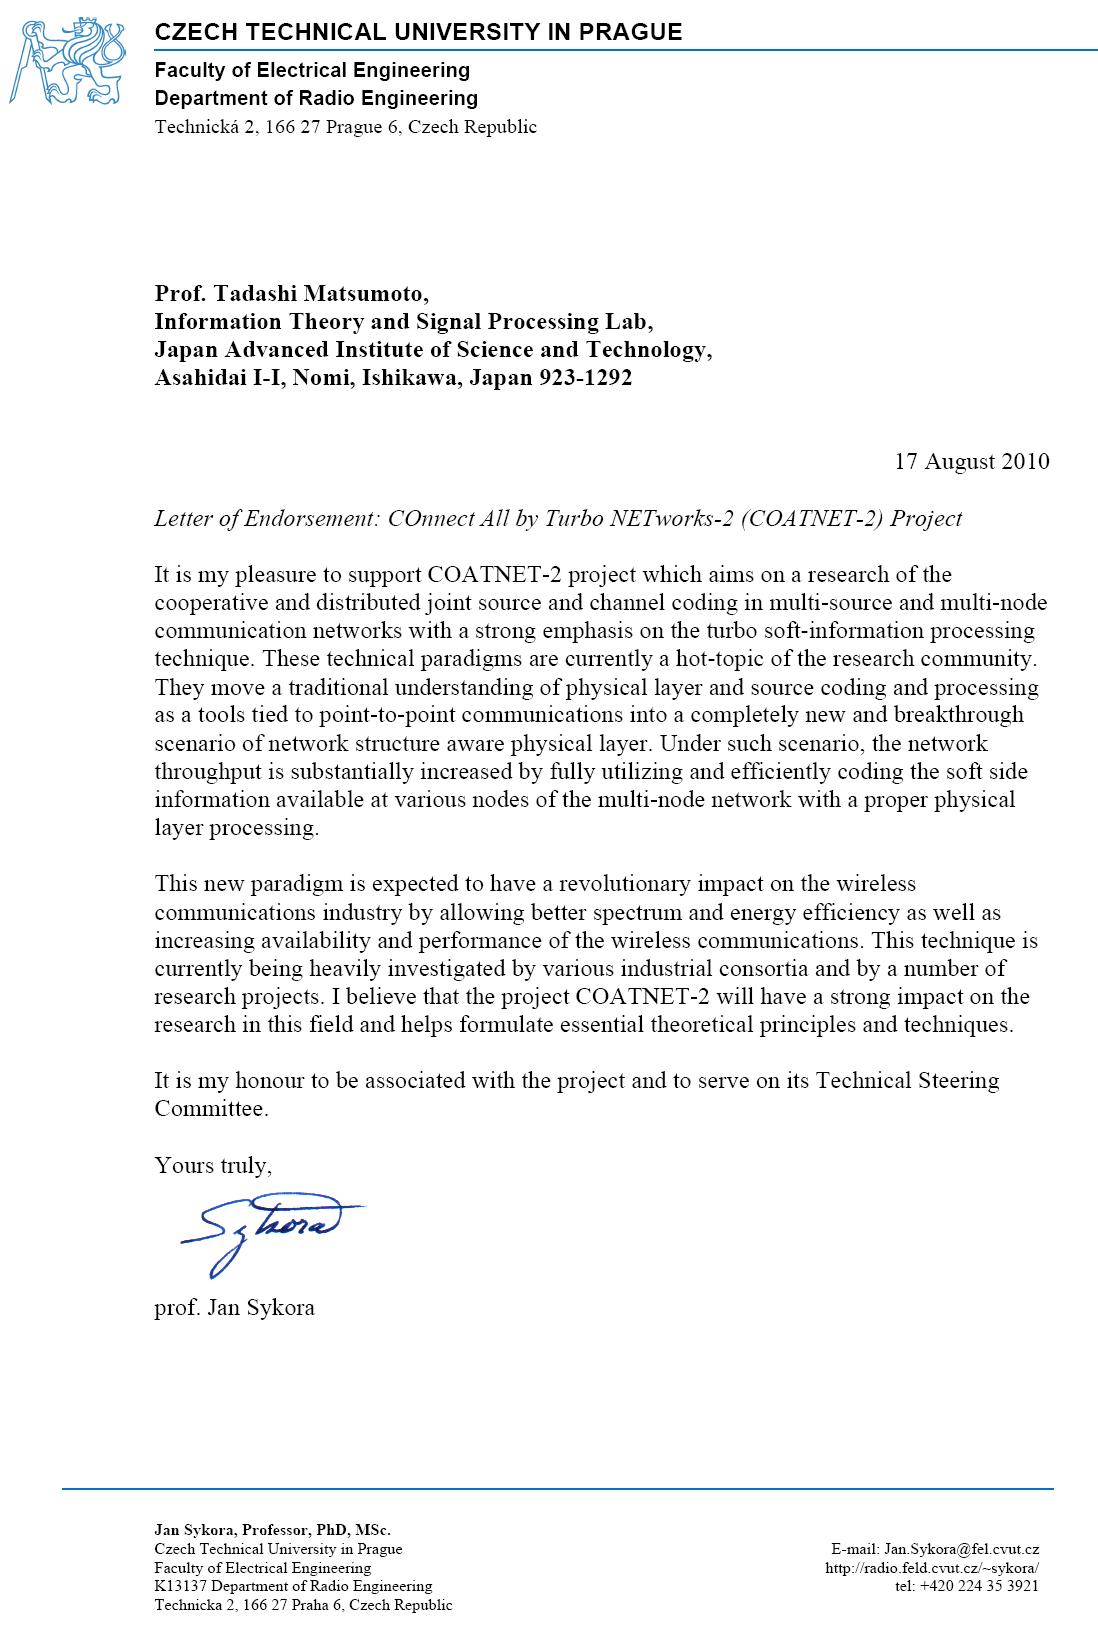 Letter of Endorsement to COATNET-2 Project from CZECH TECHNICAL UNIVERSITY in PRAGUE